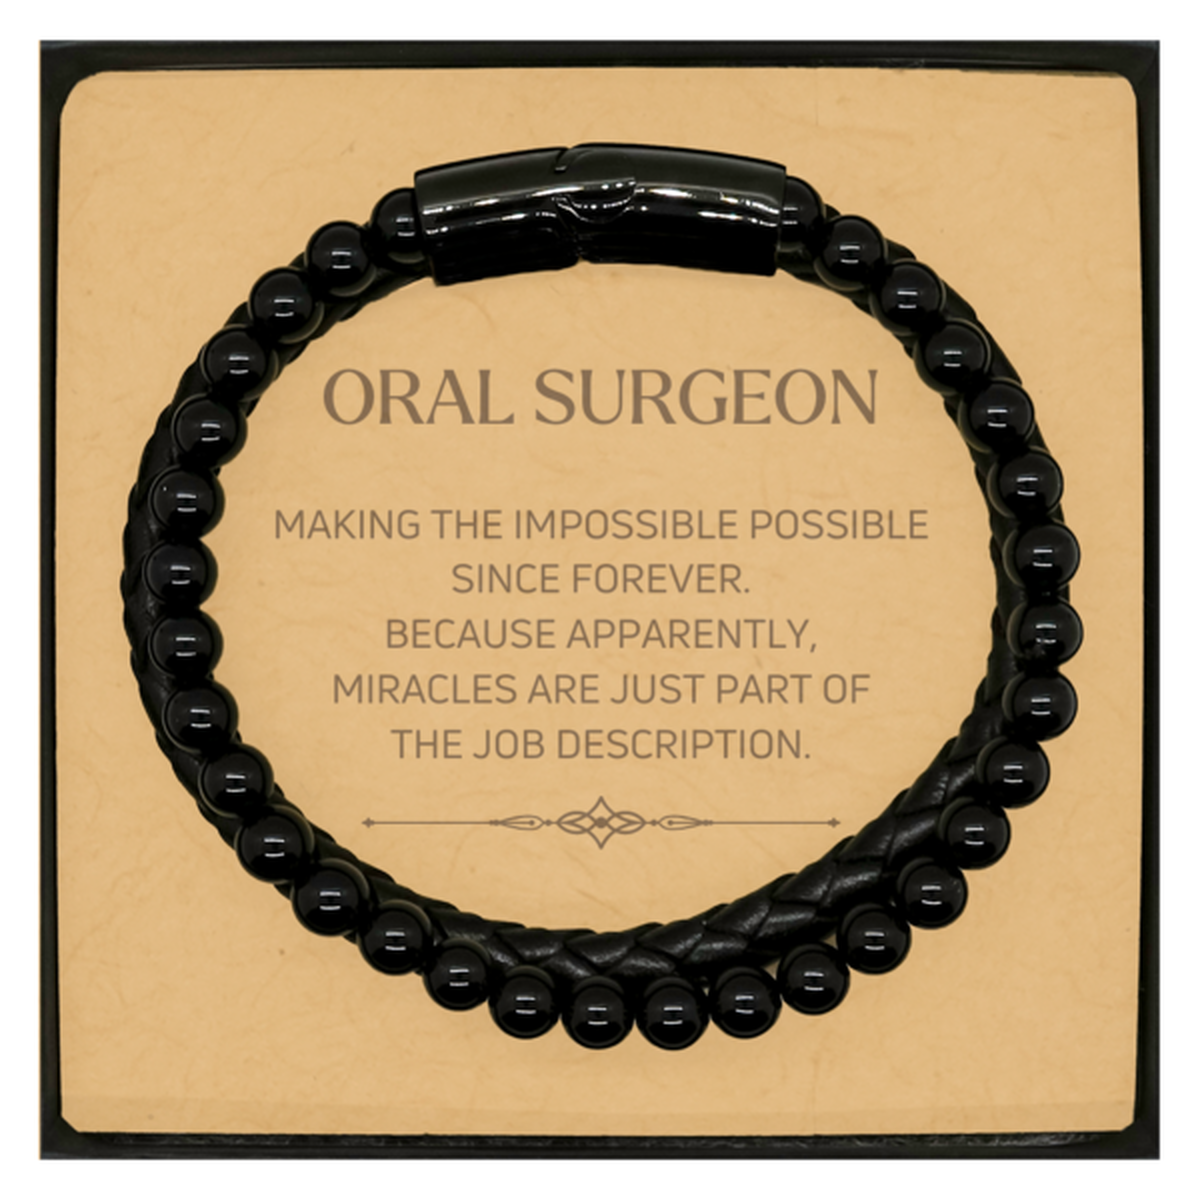 Funny Oral Surgeon Gifts, Miracles are just part of the job description, Inspirational Birthday Christmas Stone Leather Bracelets For Oral Surgeon, Men, Women, Coworkers, Friends, Boss